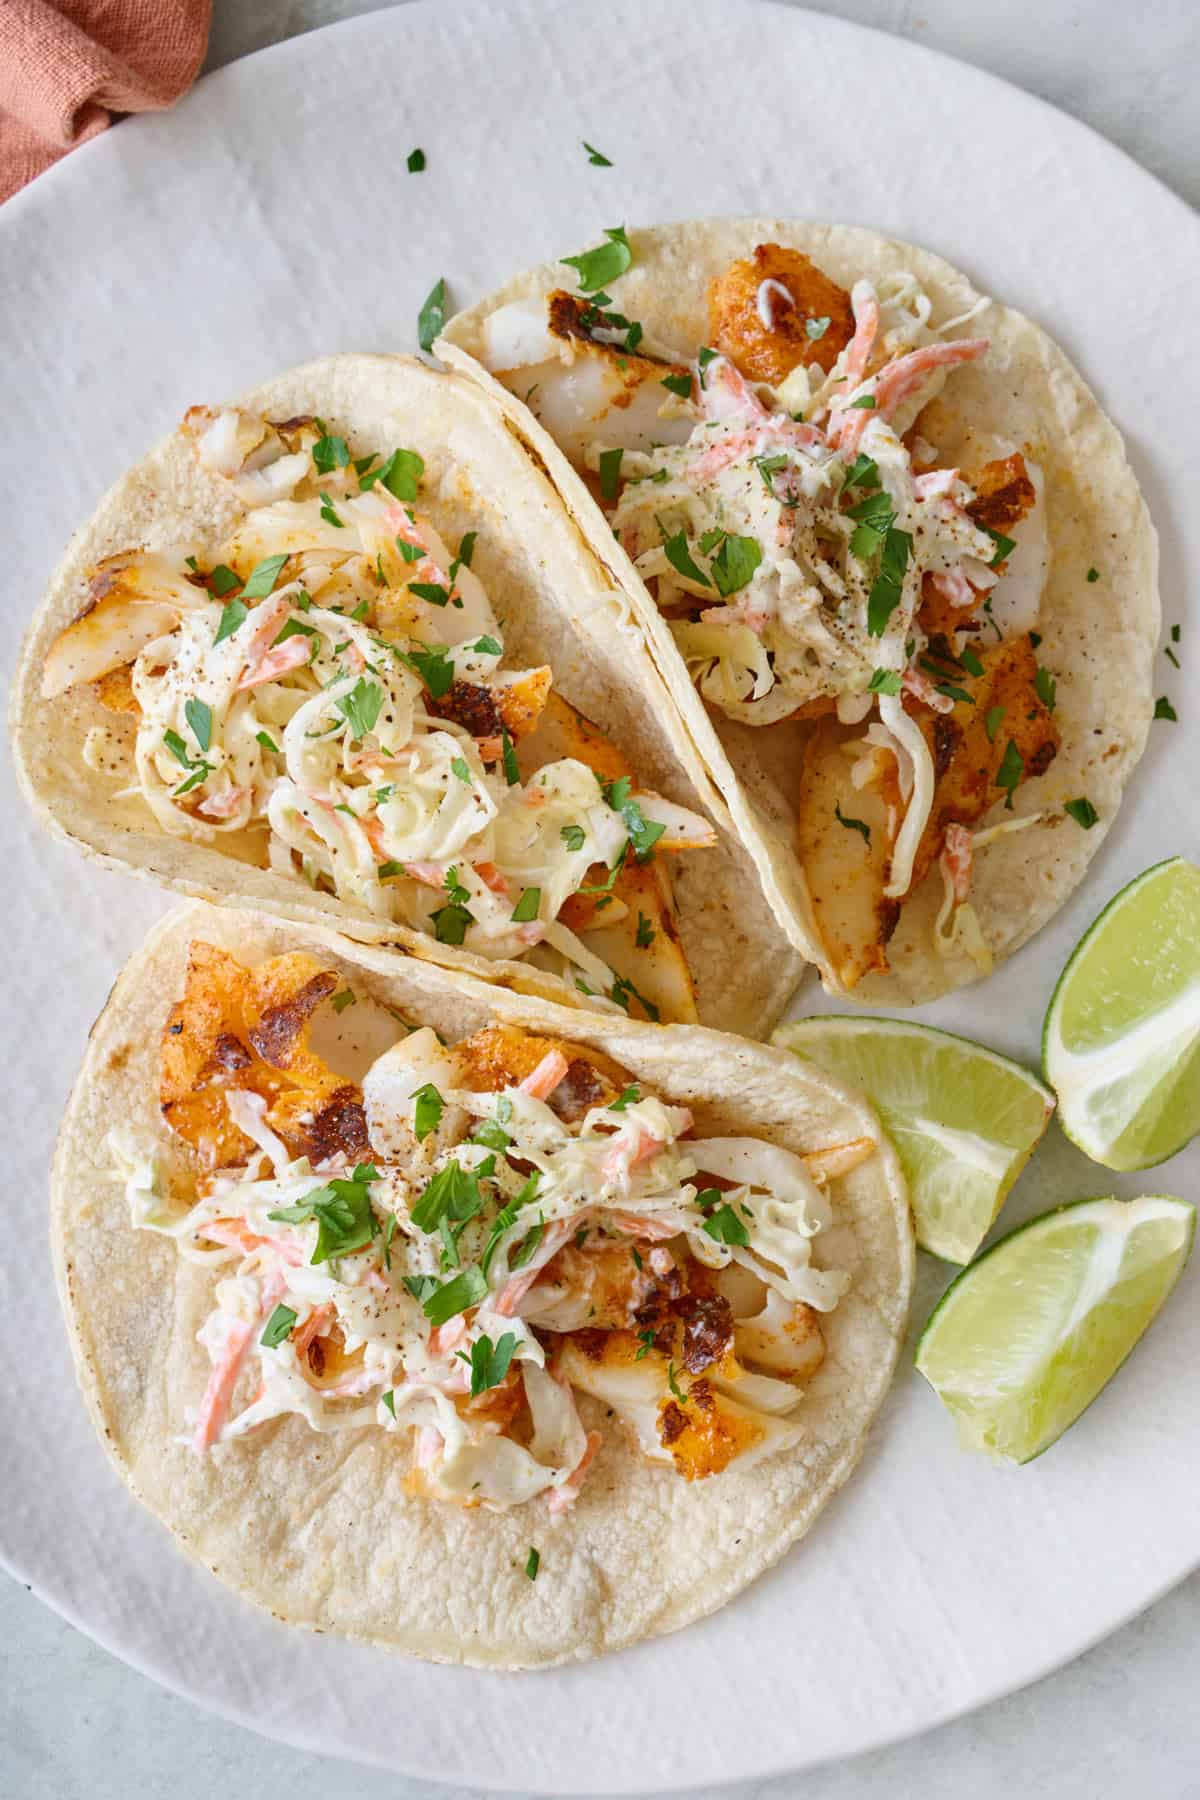 Three grilled fish tacos topped with coleslaw and topped cilantro on a plate.